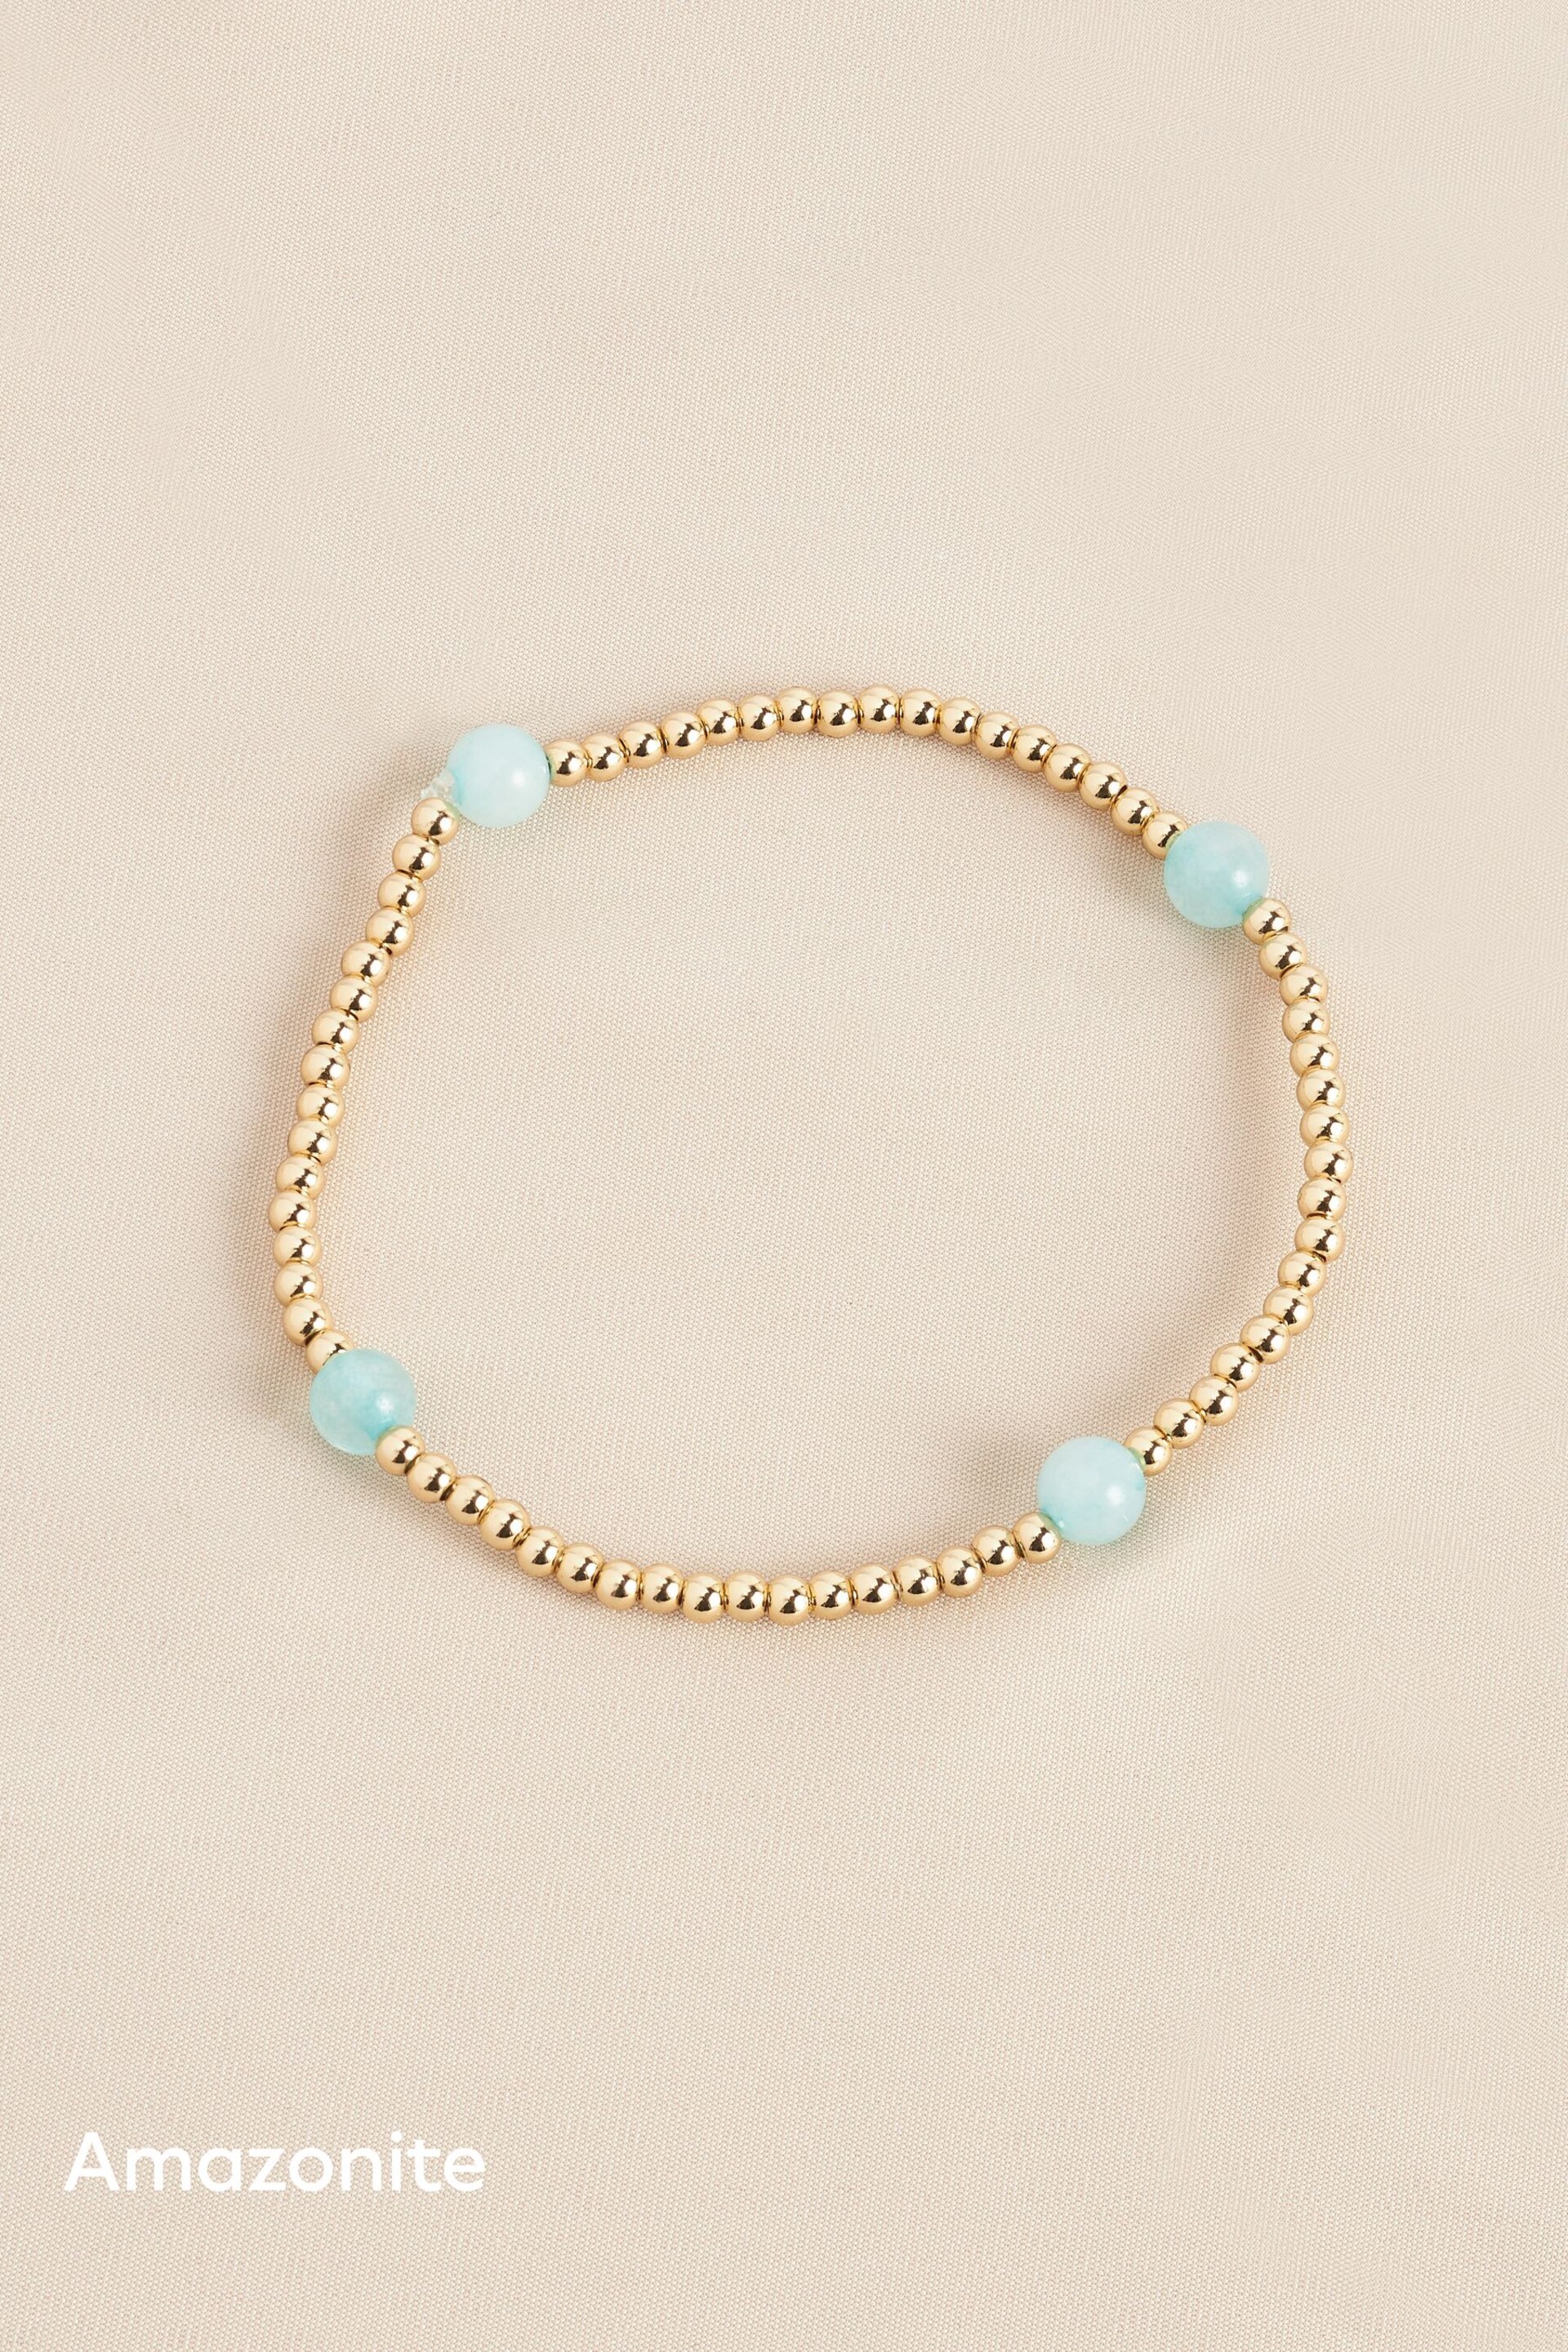 Gold/Silver Plated Sterling Silver Semi Precious Stone Beaded Stretch Bracelet - Image 5 of 9